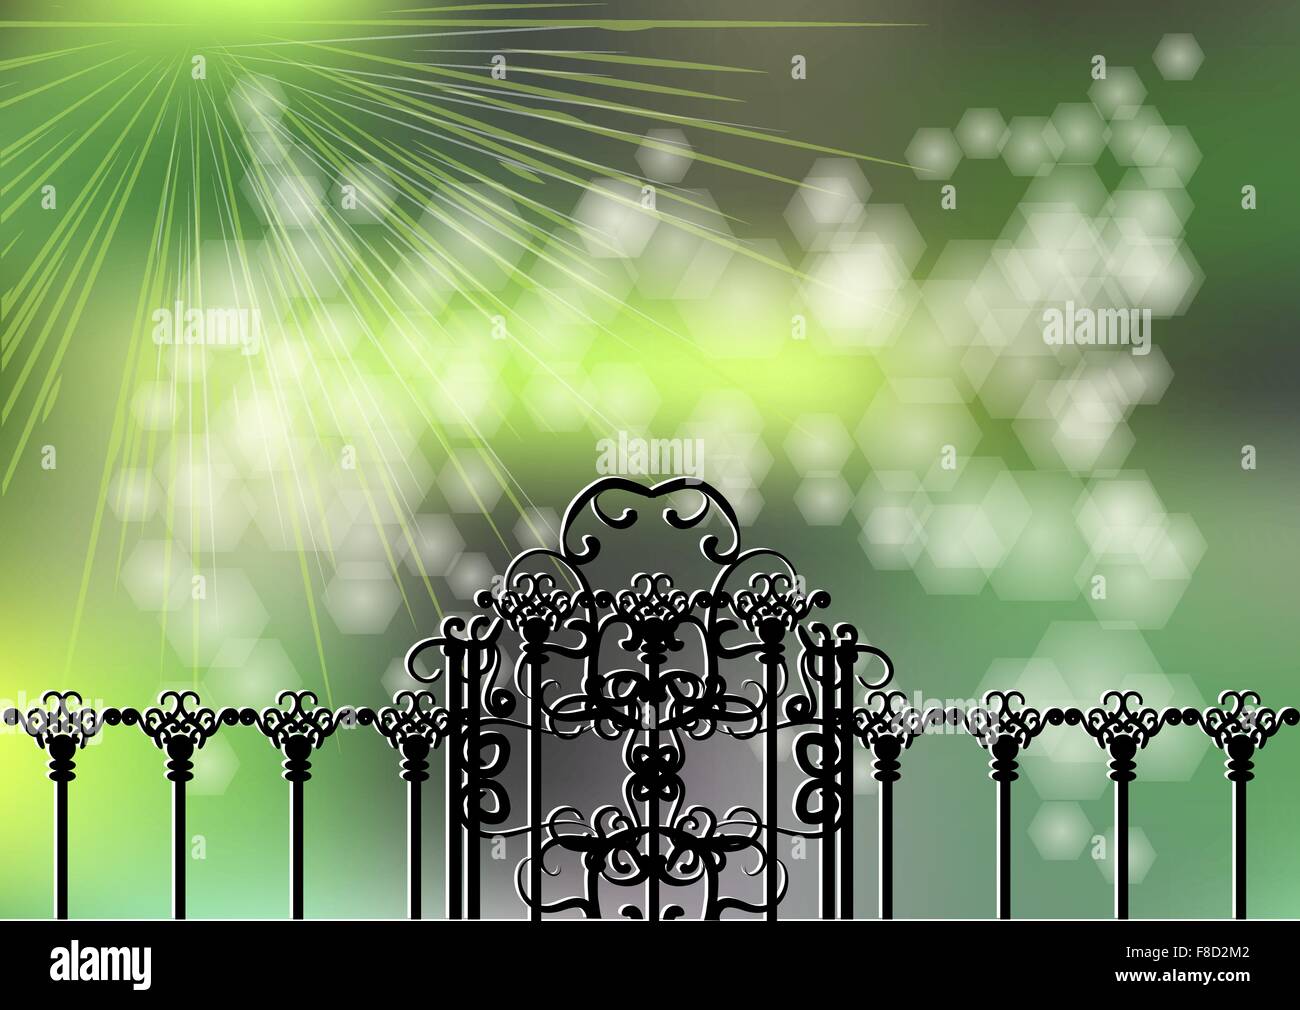 garden gate on green background with light Stock Vector